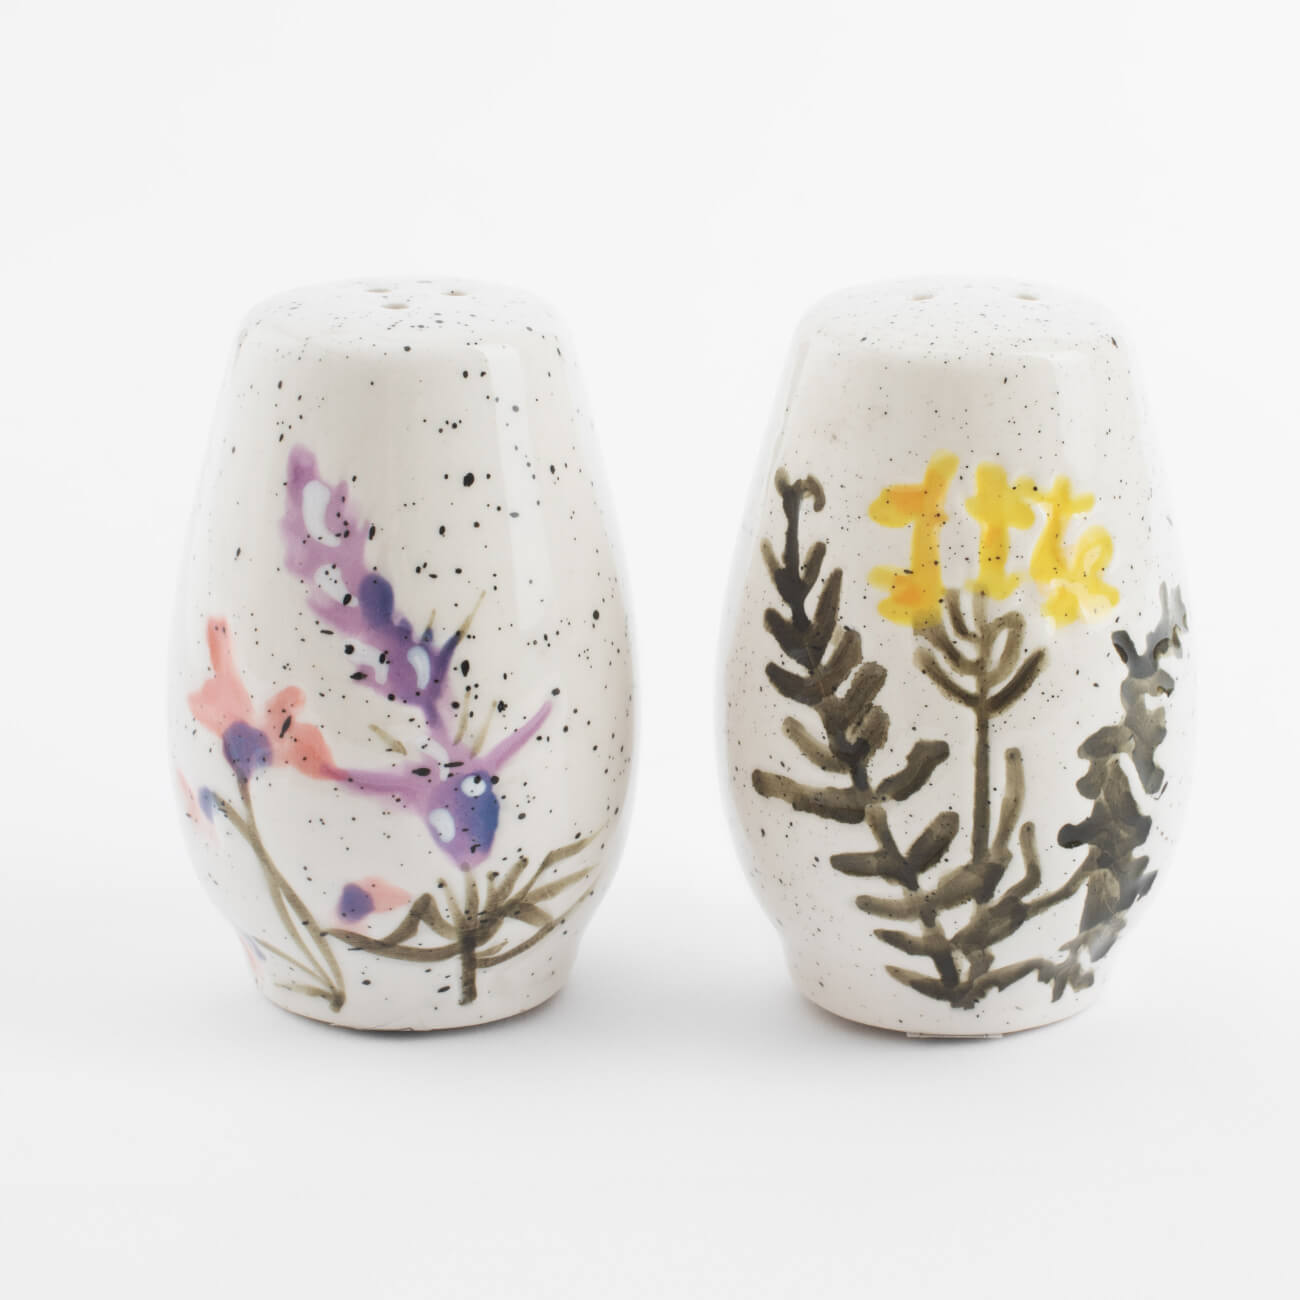 Salt and pepper set, 7 cm, ceramic, milky, speckled, Wildflowers, Meadow speckled изображение № 1